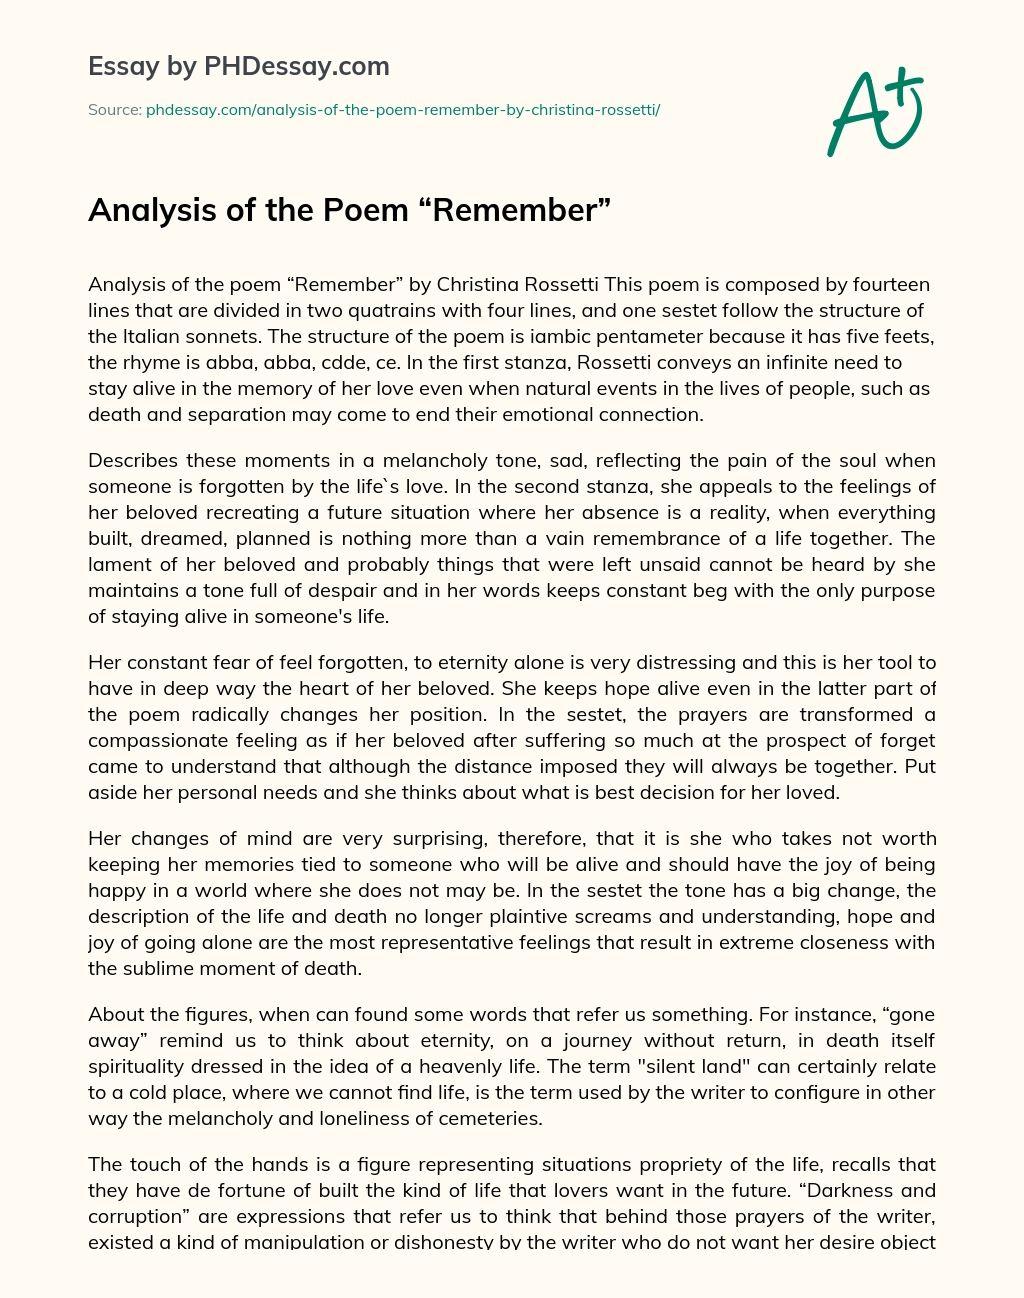 Analysis of the Poem “Remember” essay